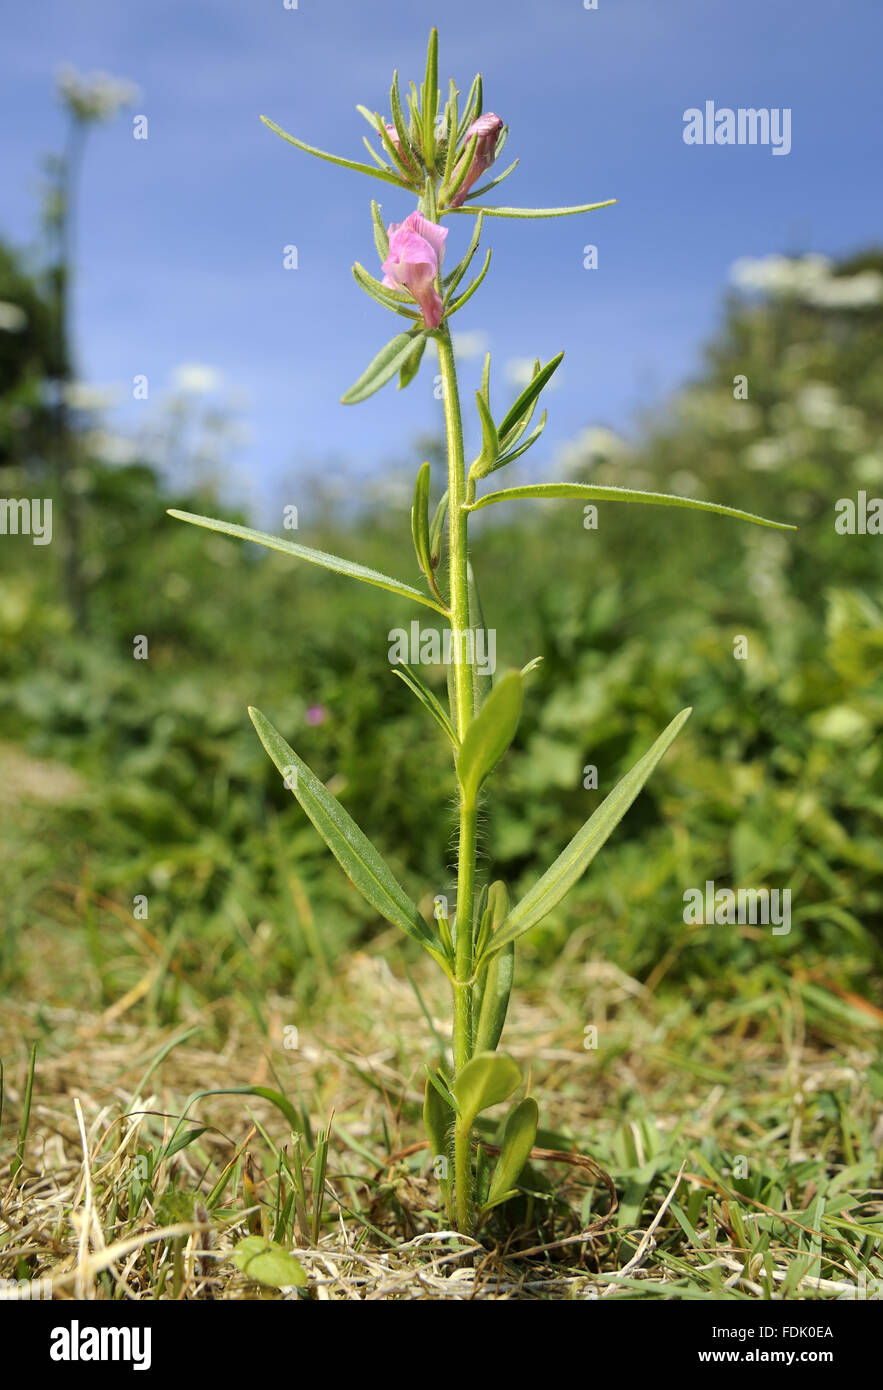 Lesser Snapdragon is an arable plant/weed, native of disturbed ground and farmland. The small pink flower resembles a miniature snapdragon and are followed by a hairy green fruit which is said to resemble a weasel's snout. Also known as 'weasel's snout' o Stock Photo